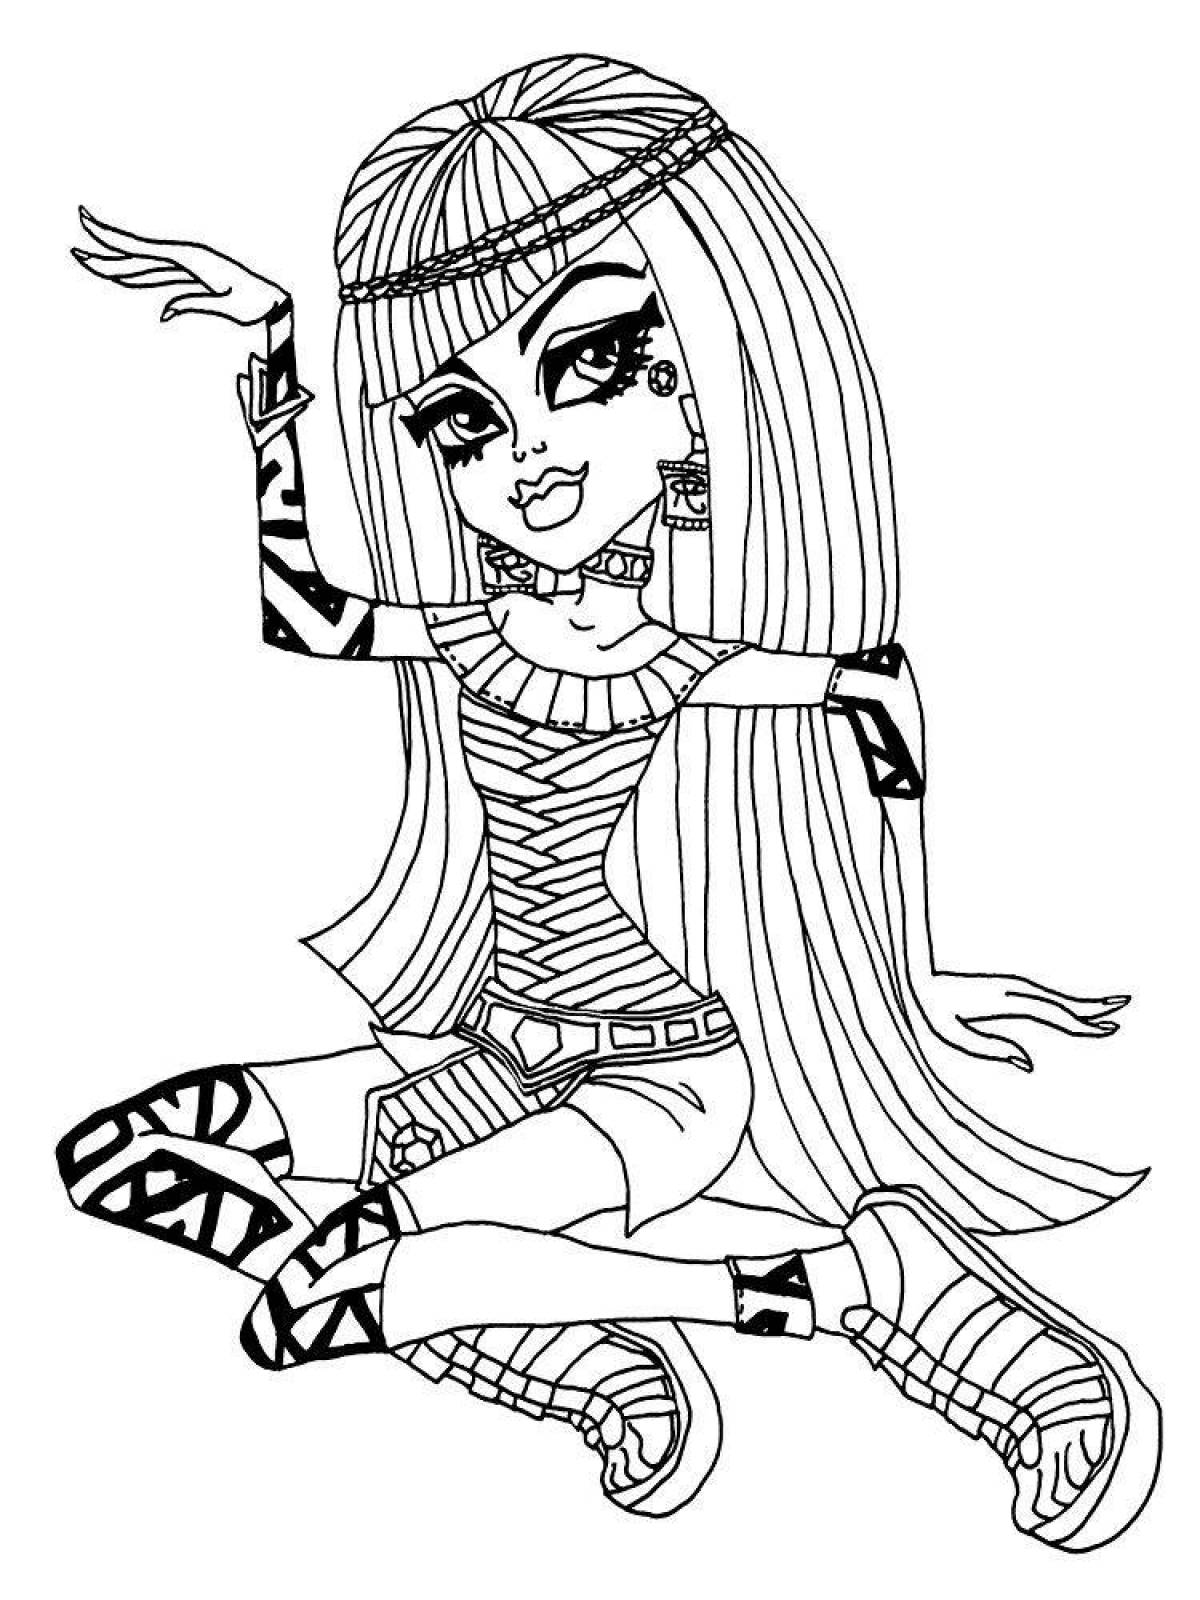 Adorable monster high coloring page